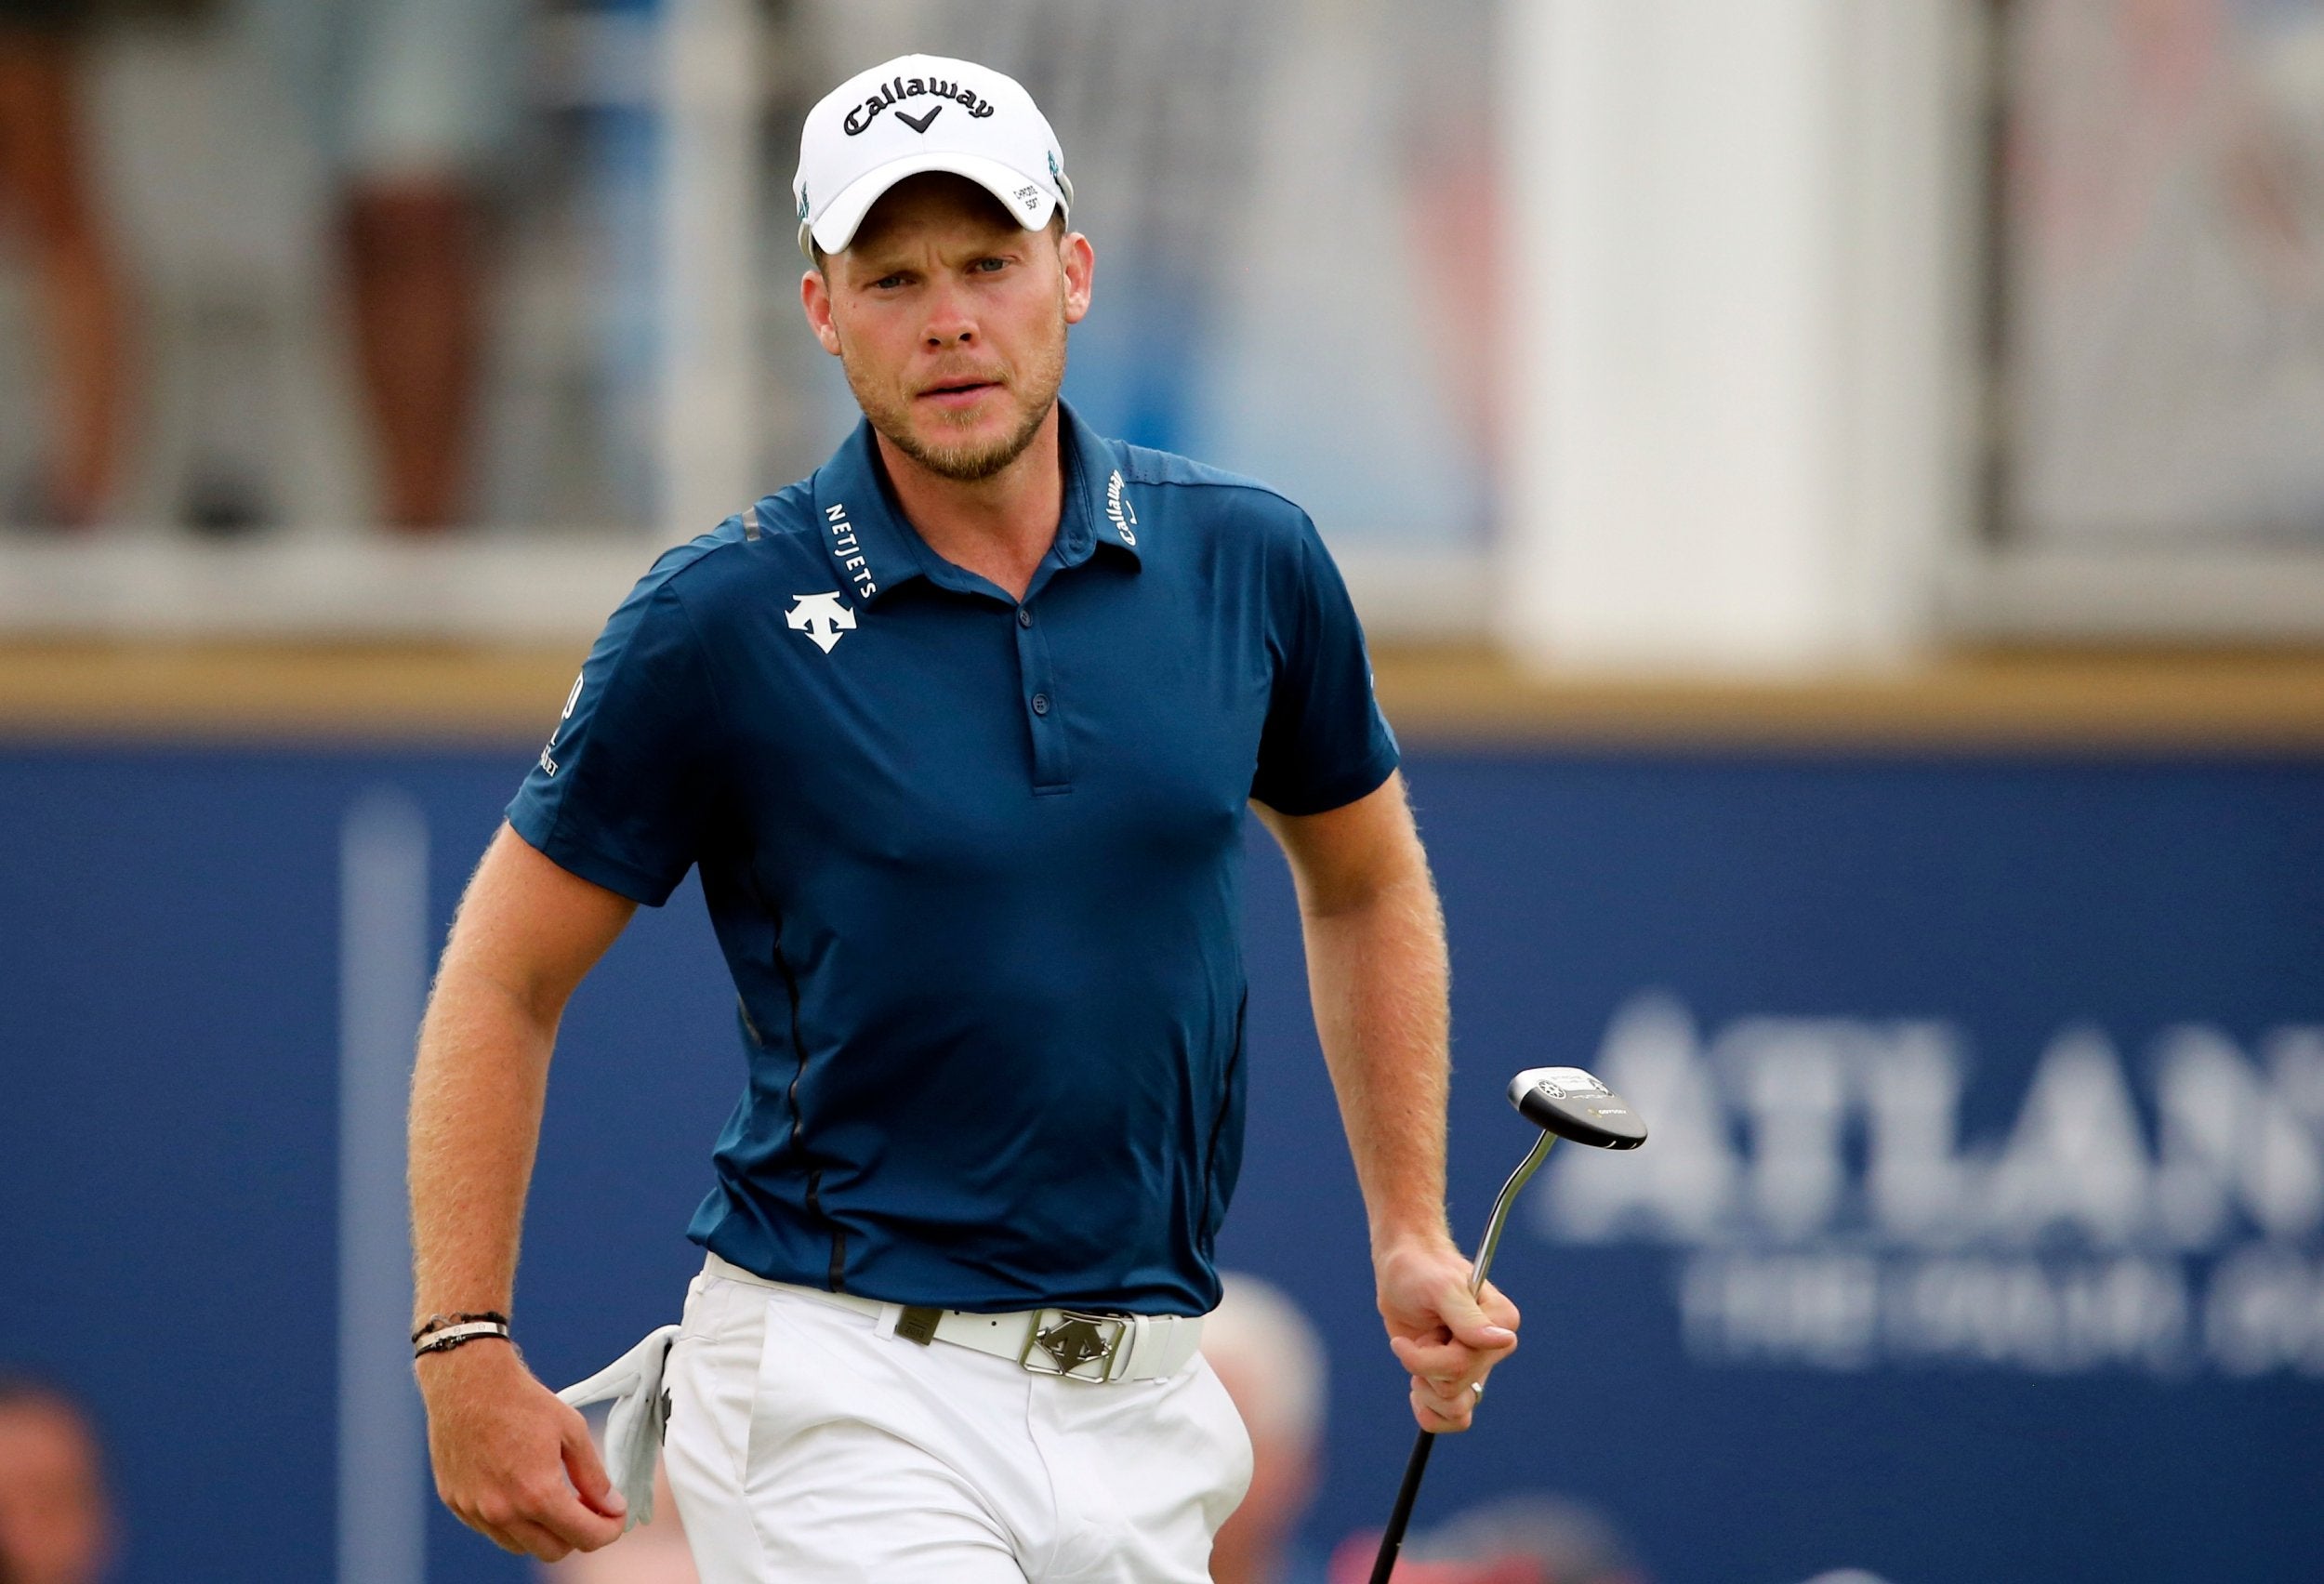 Danny Willett is seeking to end a two-and-a-half year drought in Dubai